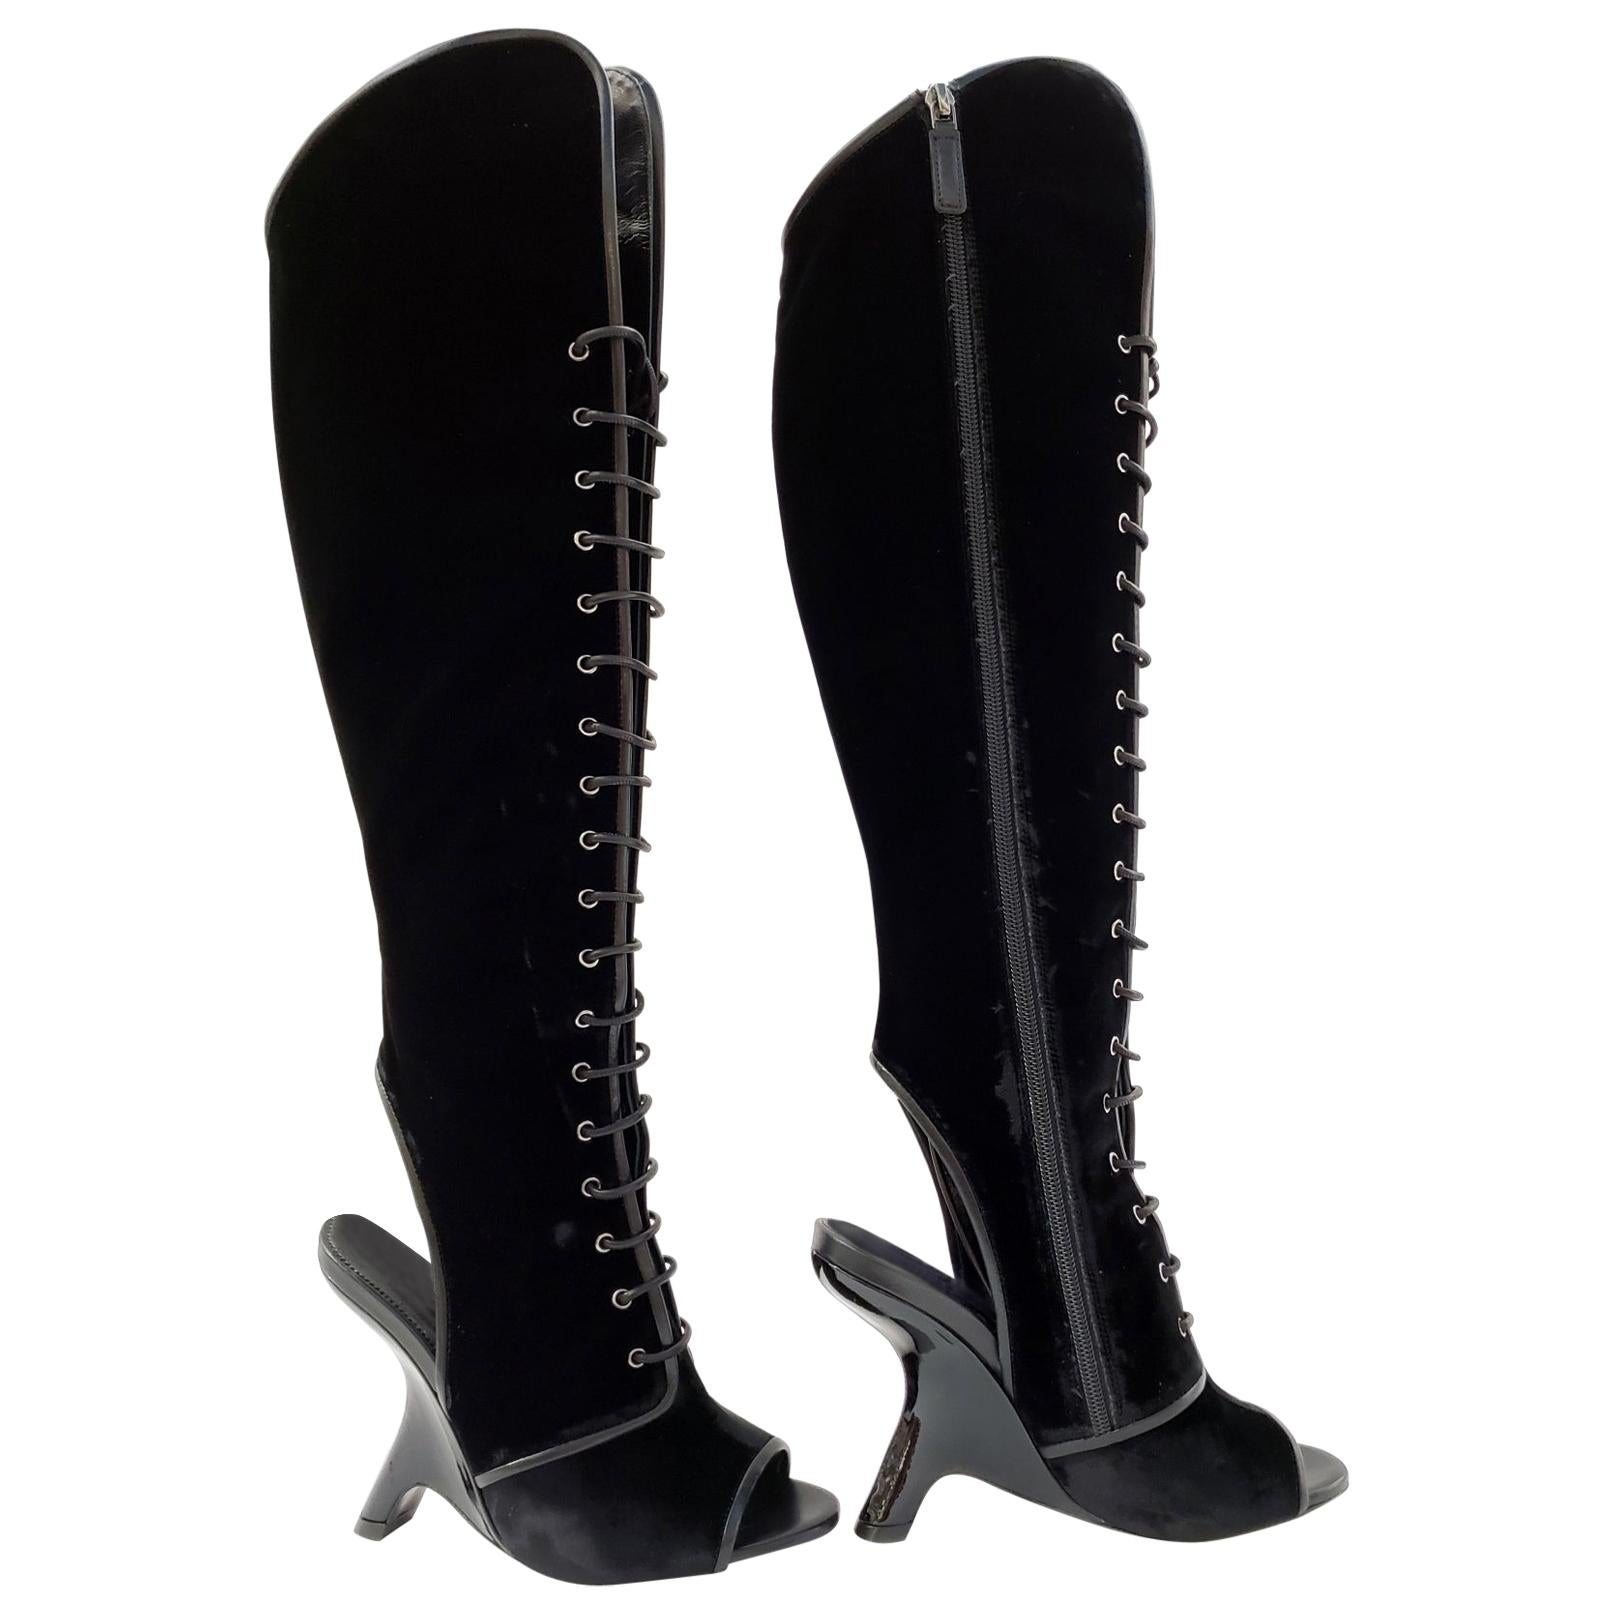 New TOM FORD Black Velvet Lace-Up Over-the-Knee Boots with Open toe 36.5 - 6.5 For Sale